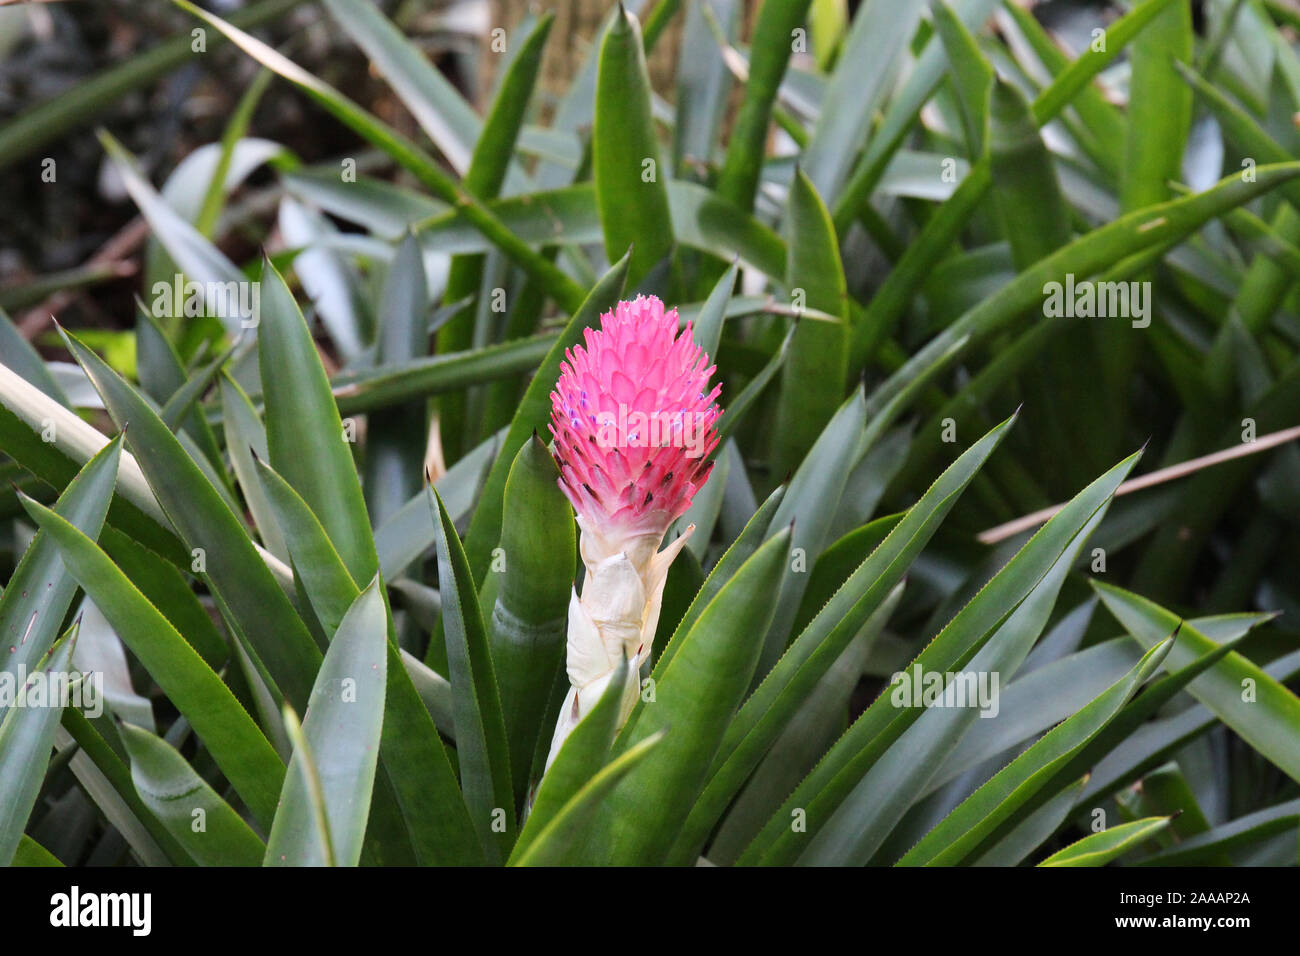 Close up of a pink flowering Quesnelia plant, a Bromeliad native to Brazil Stock Photo